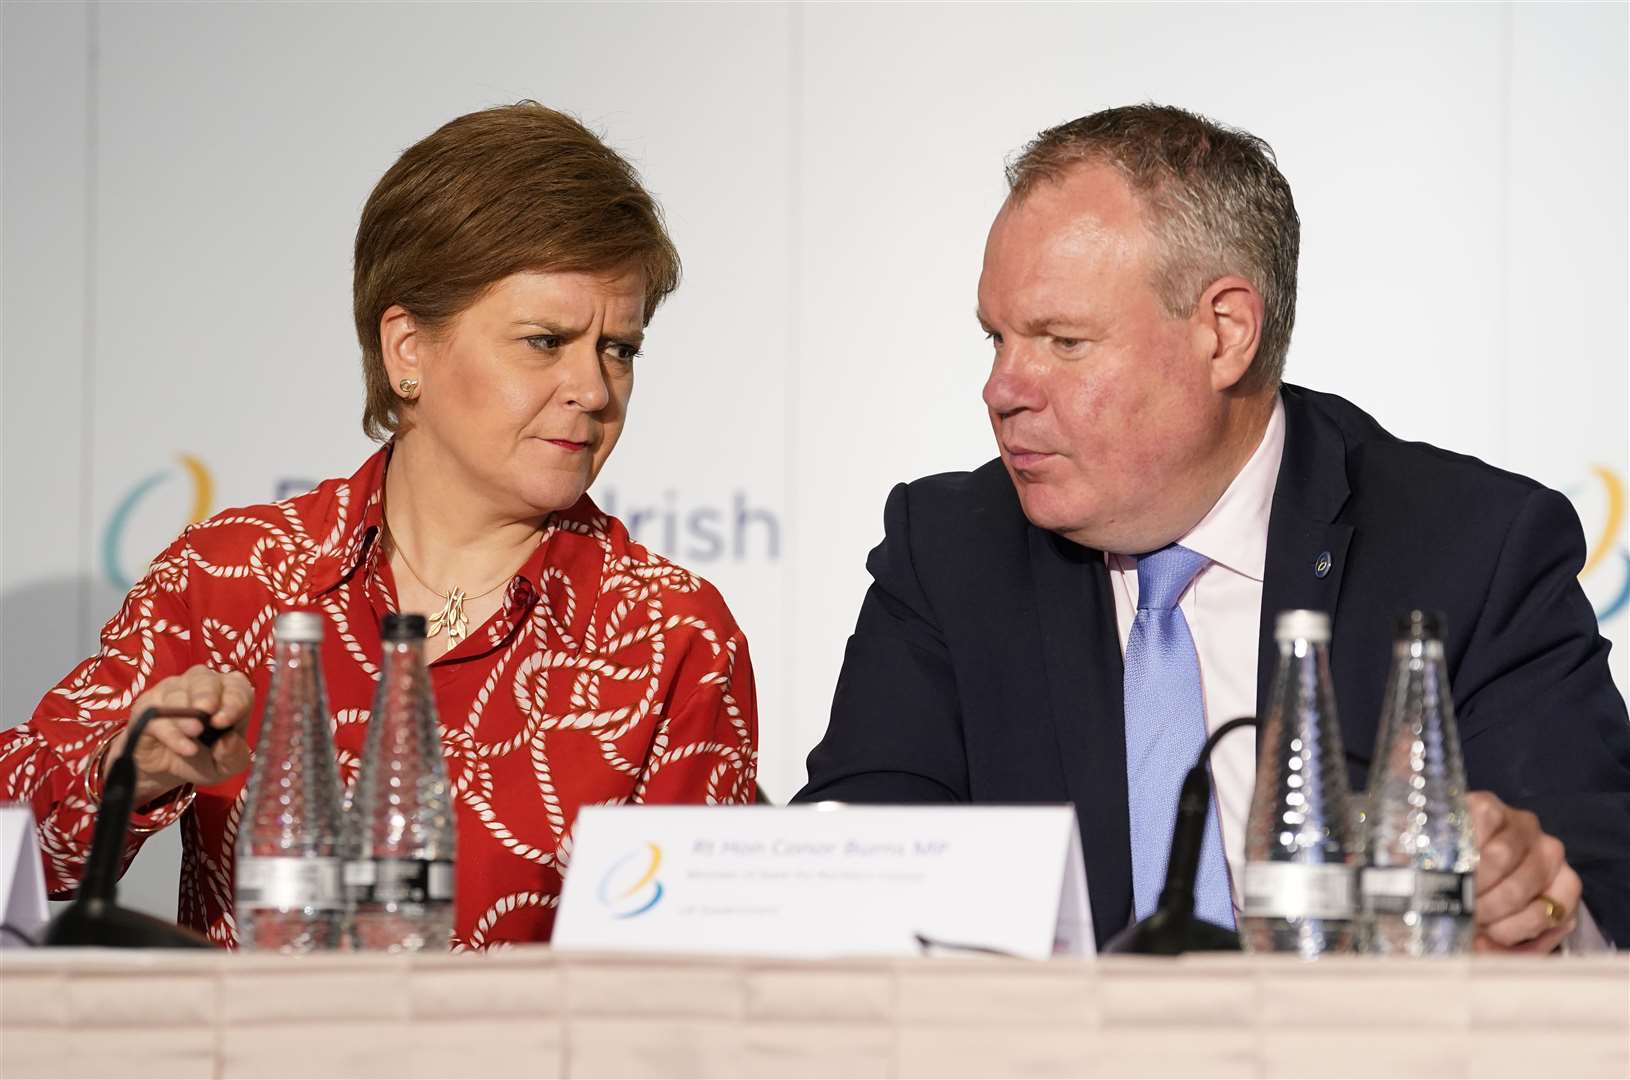 Scottish First Minister Nicola Sturgeon (left) and Minister of State for Northern Ireland Conor Burns during a press conference following a British-Irish Council (BIC) summit meeting at the St Pierre Park Hotel in Guernsey (Andrew Matthews/PA)